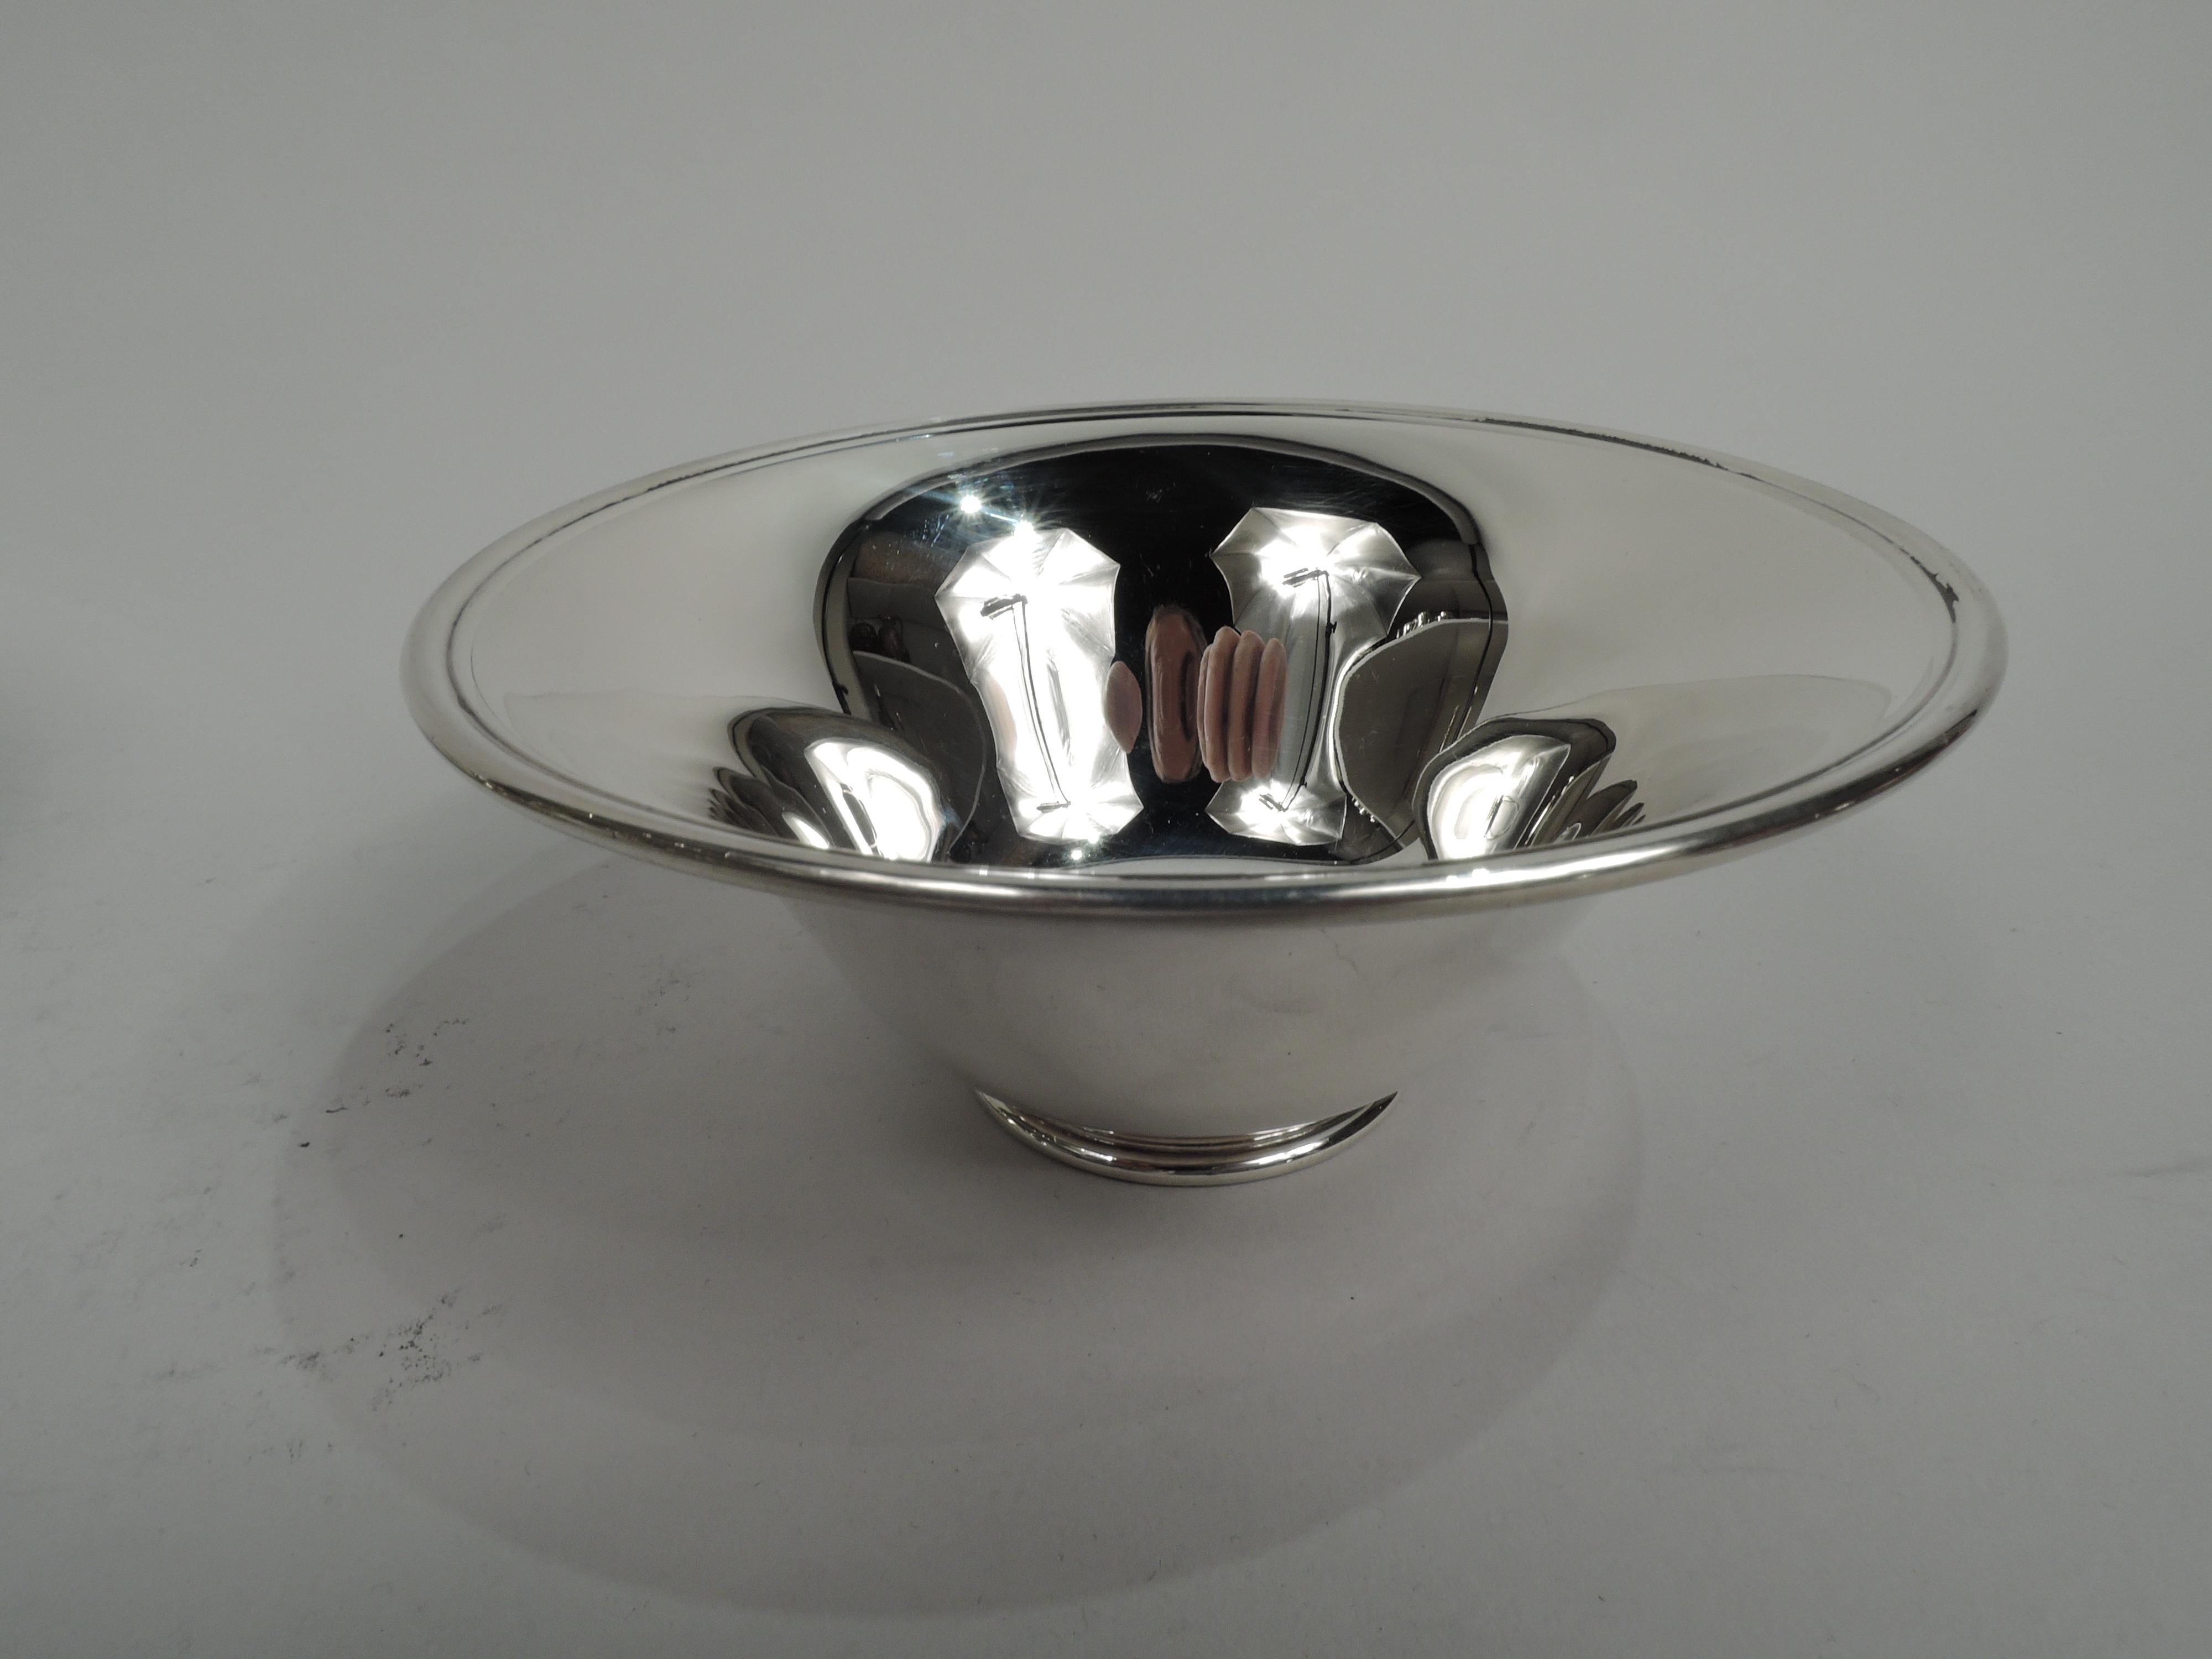 20th Century Tiffany & Co. American Modern Dessert Set for 12 with Bowls and Plates